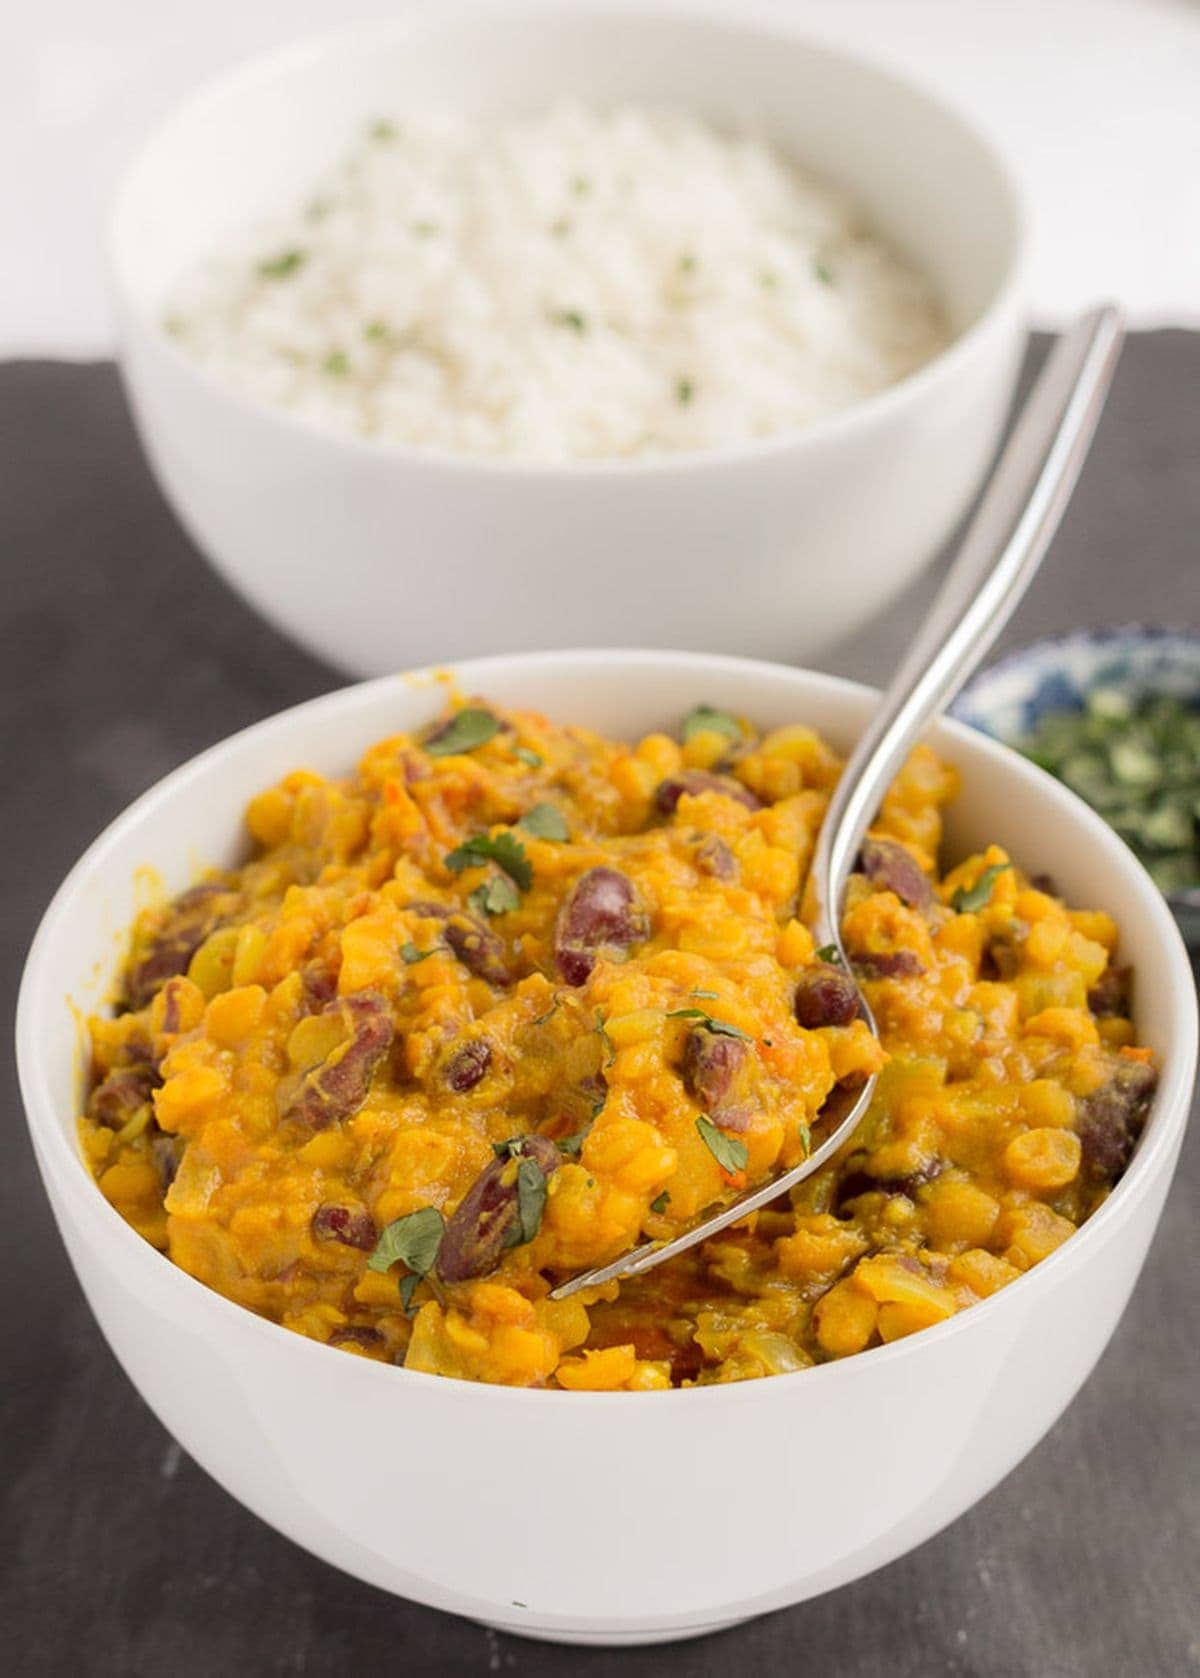 A bowl of lentil and kidney bean dal served with a spoon in it. A bowl of rice and dish of coriander to garnish in the background.